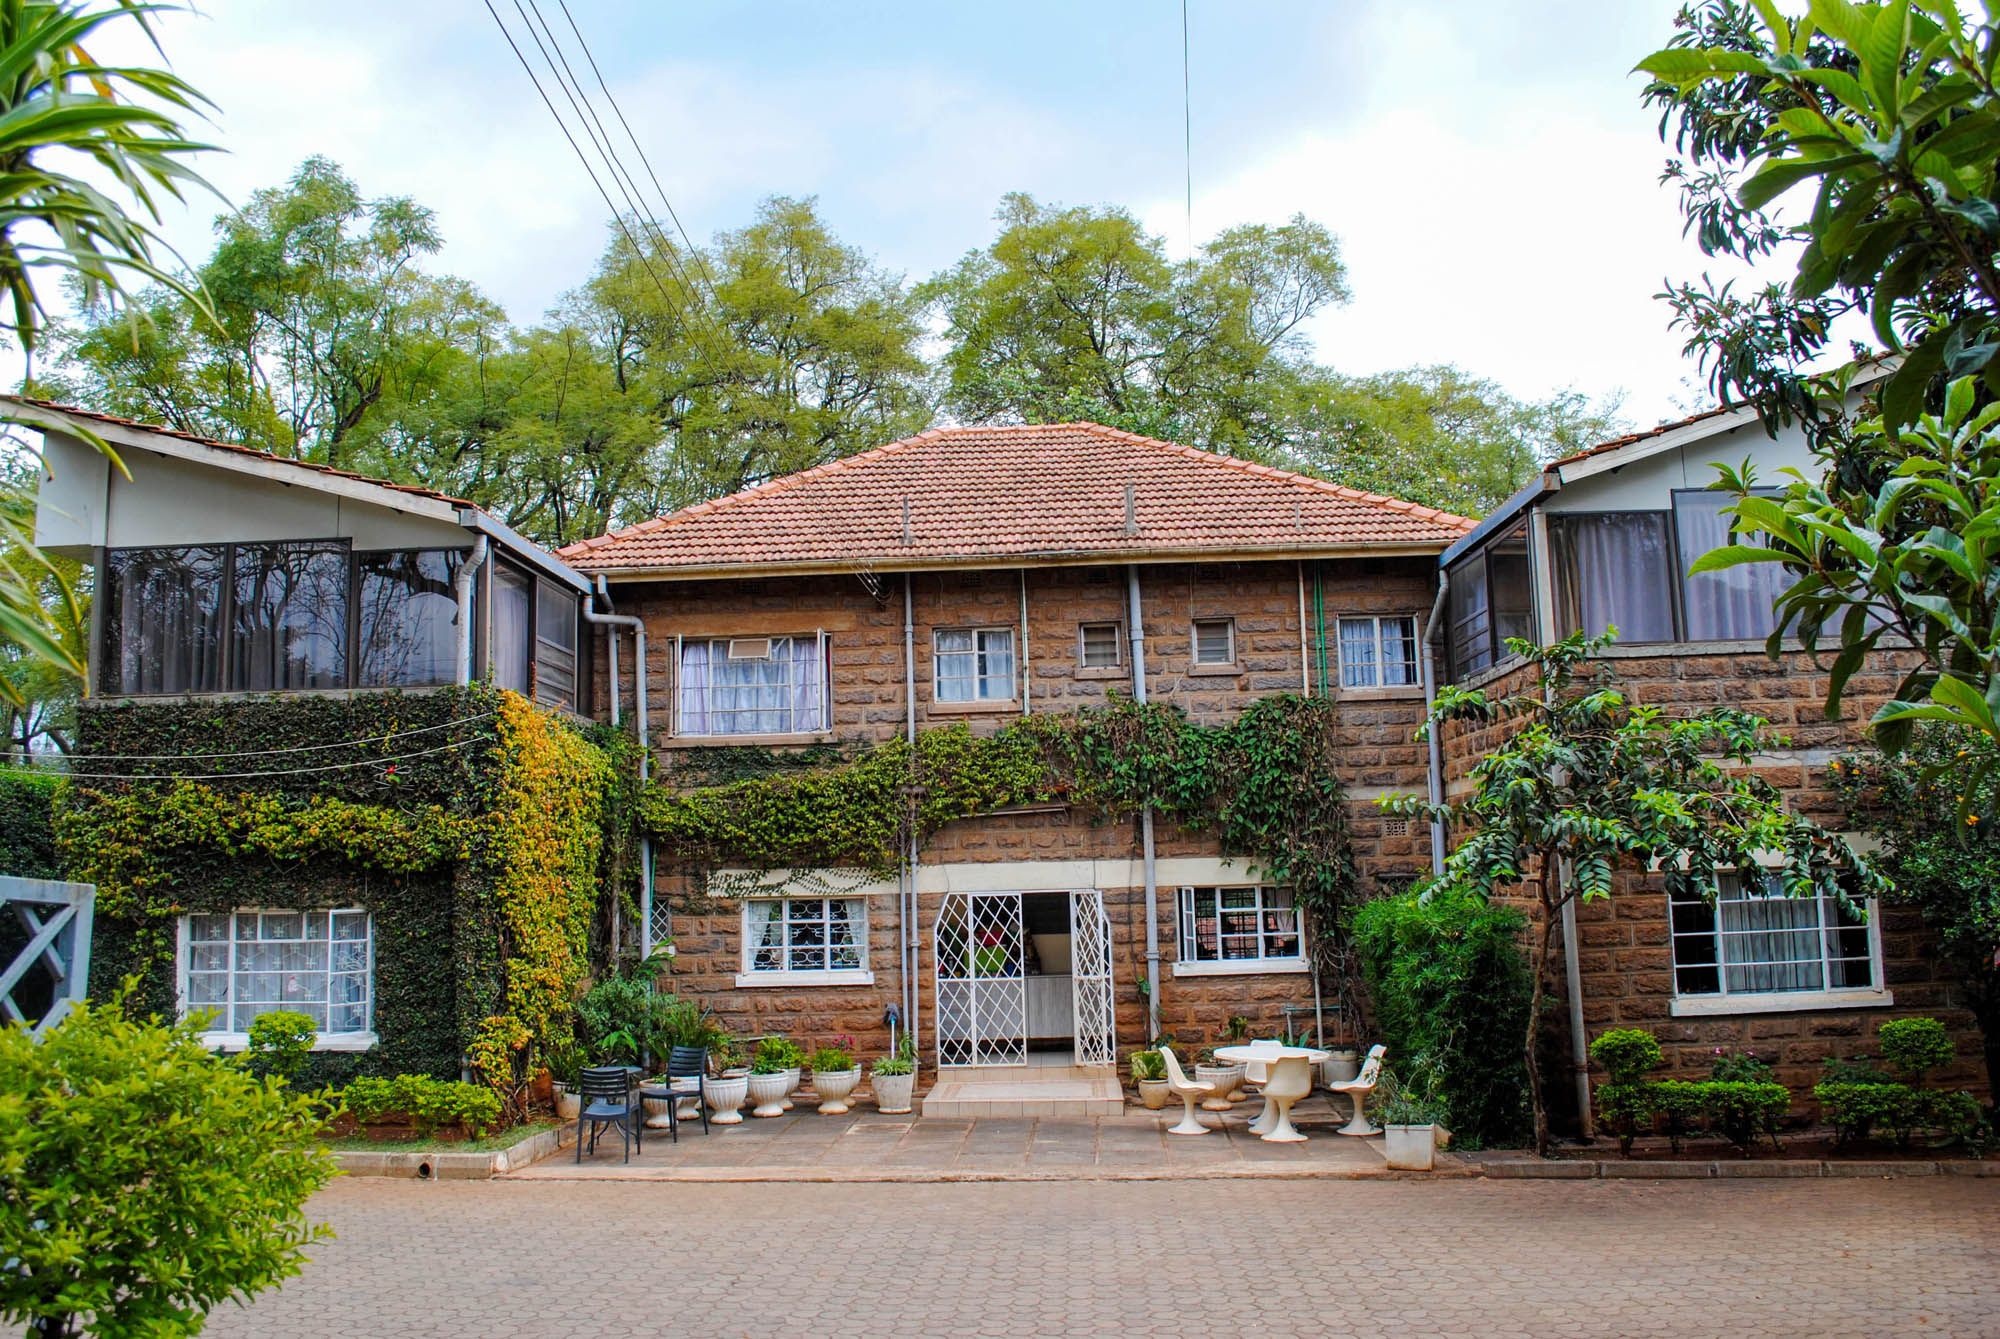 2 Bedroom Apartments in Kileleshwa with a Garden